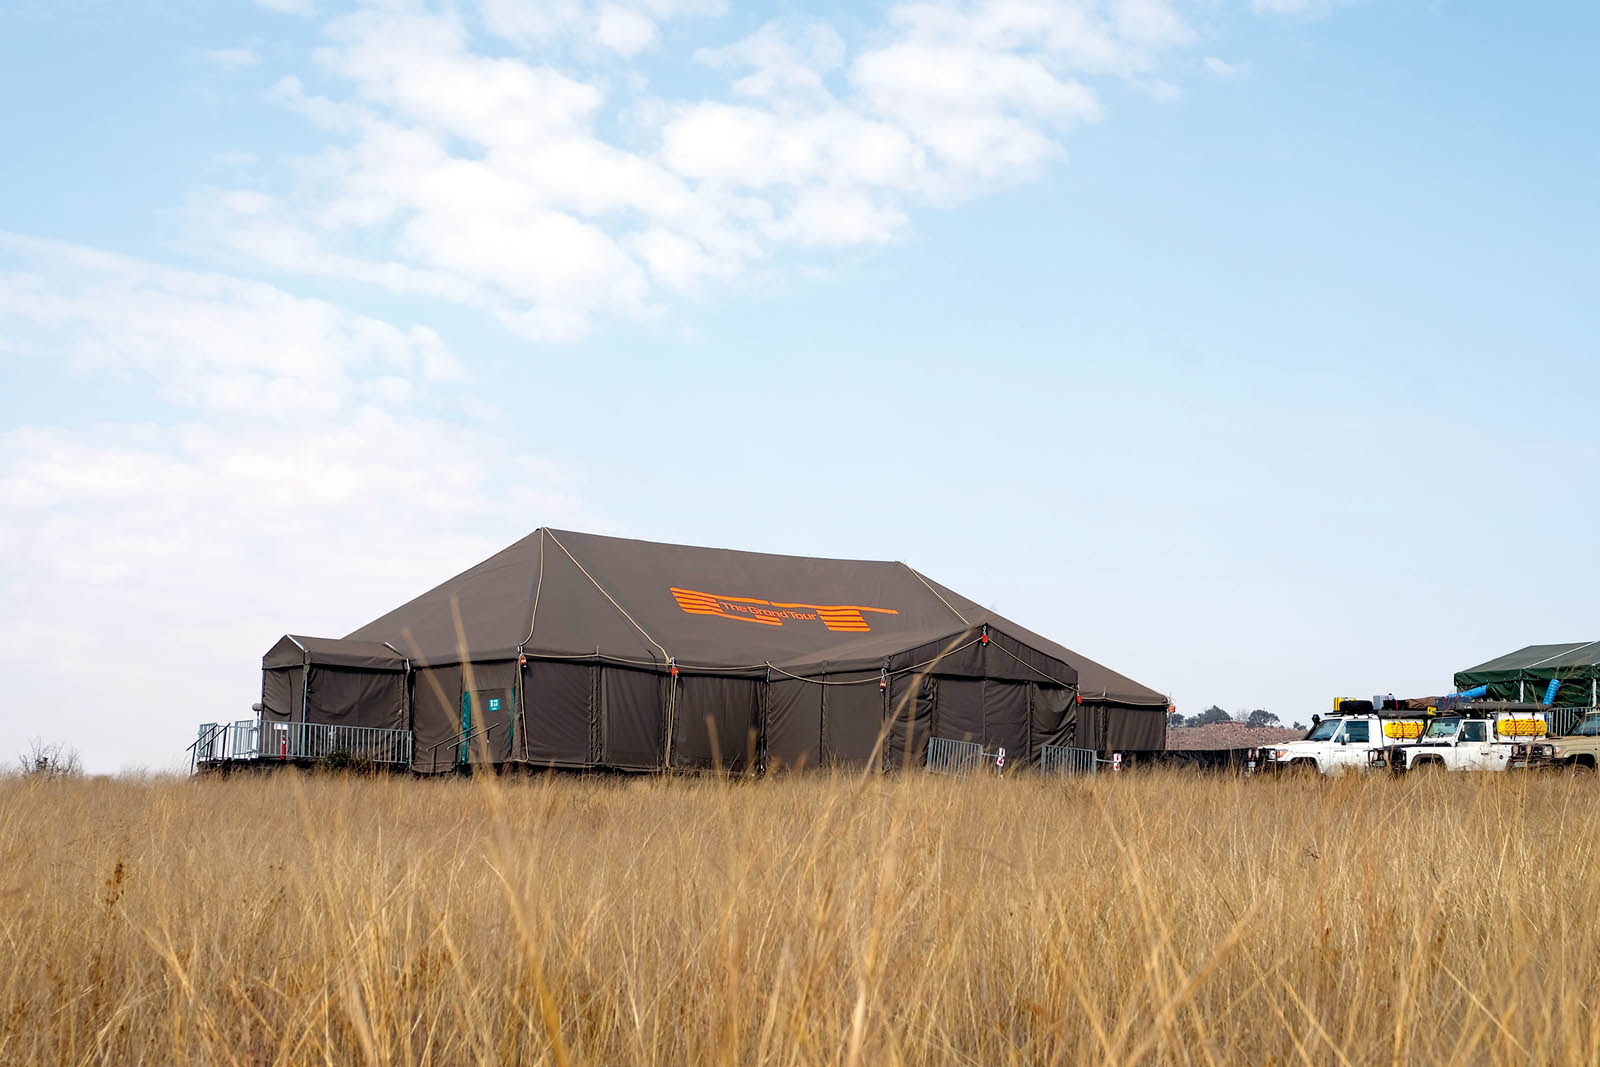 The Grand Tour tent